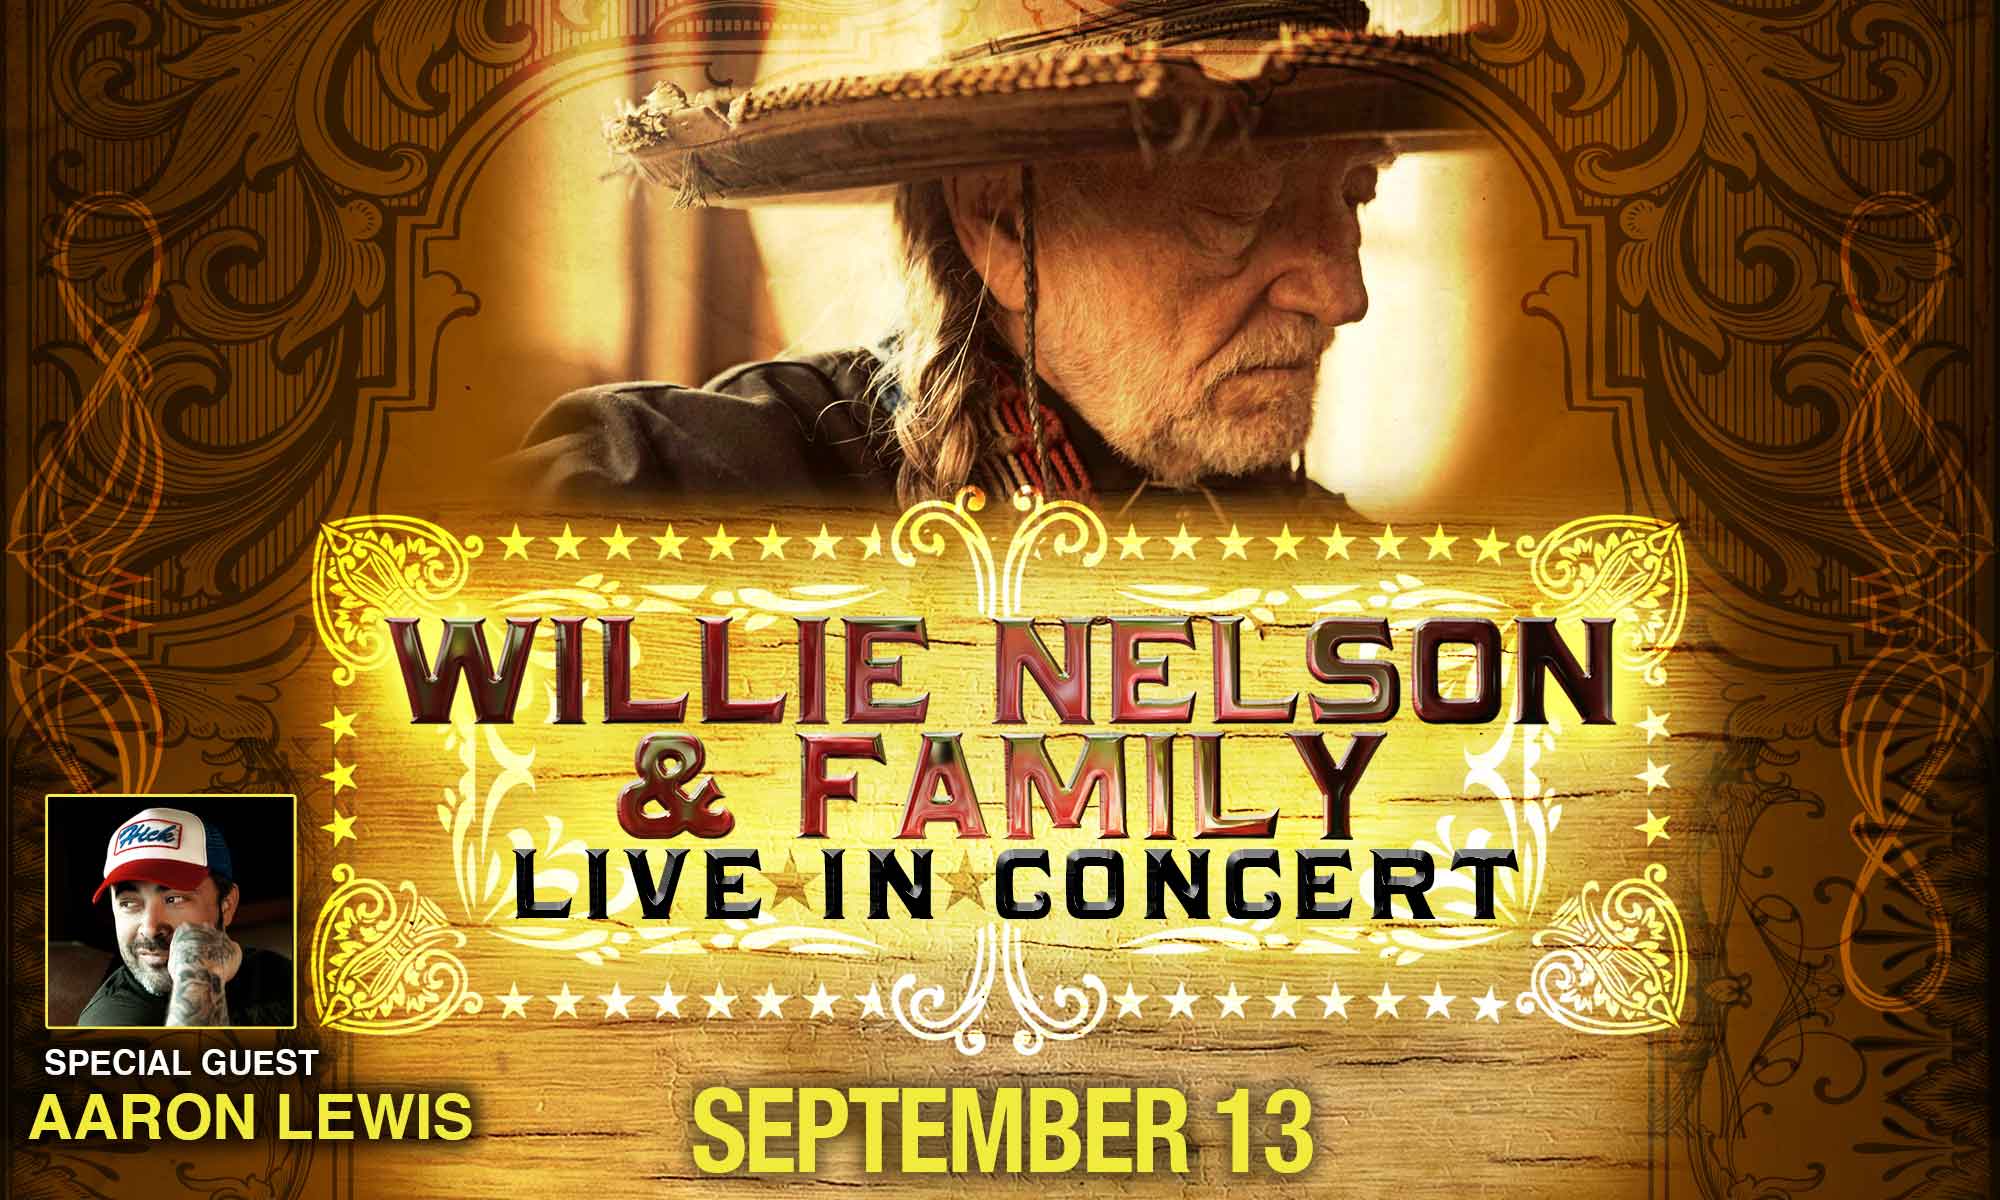 Willie Nelson at Coney Island Amphitheater on 09-13-16